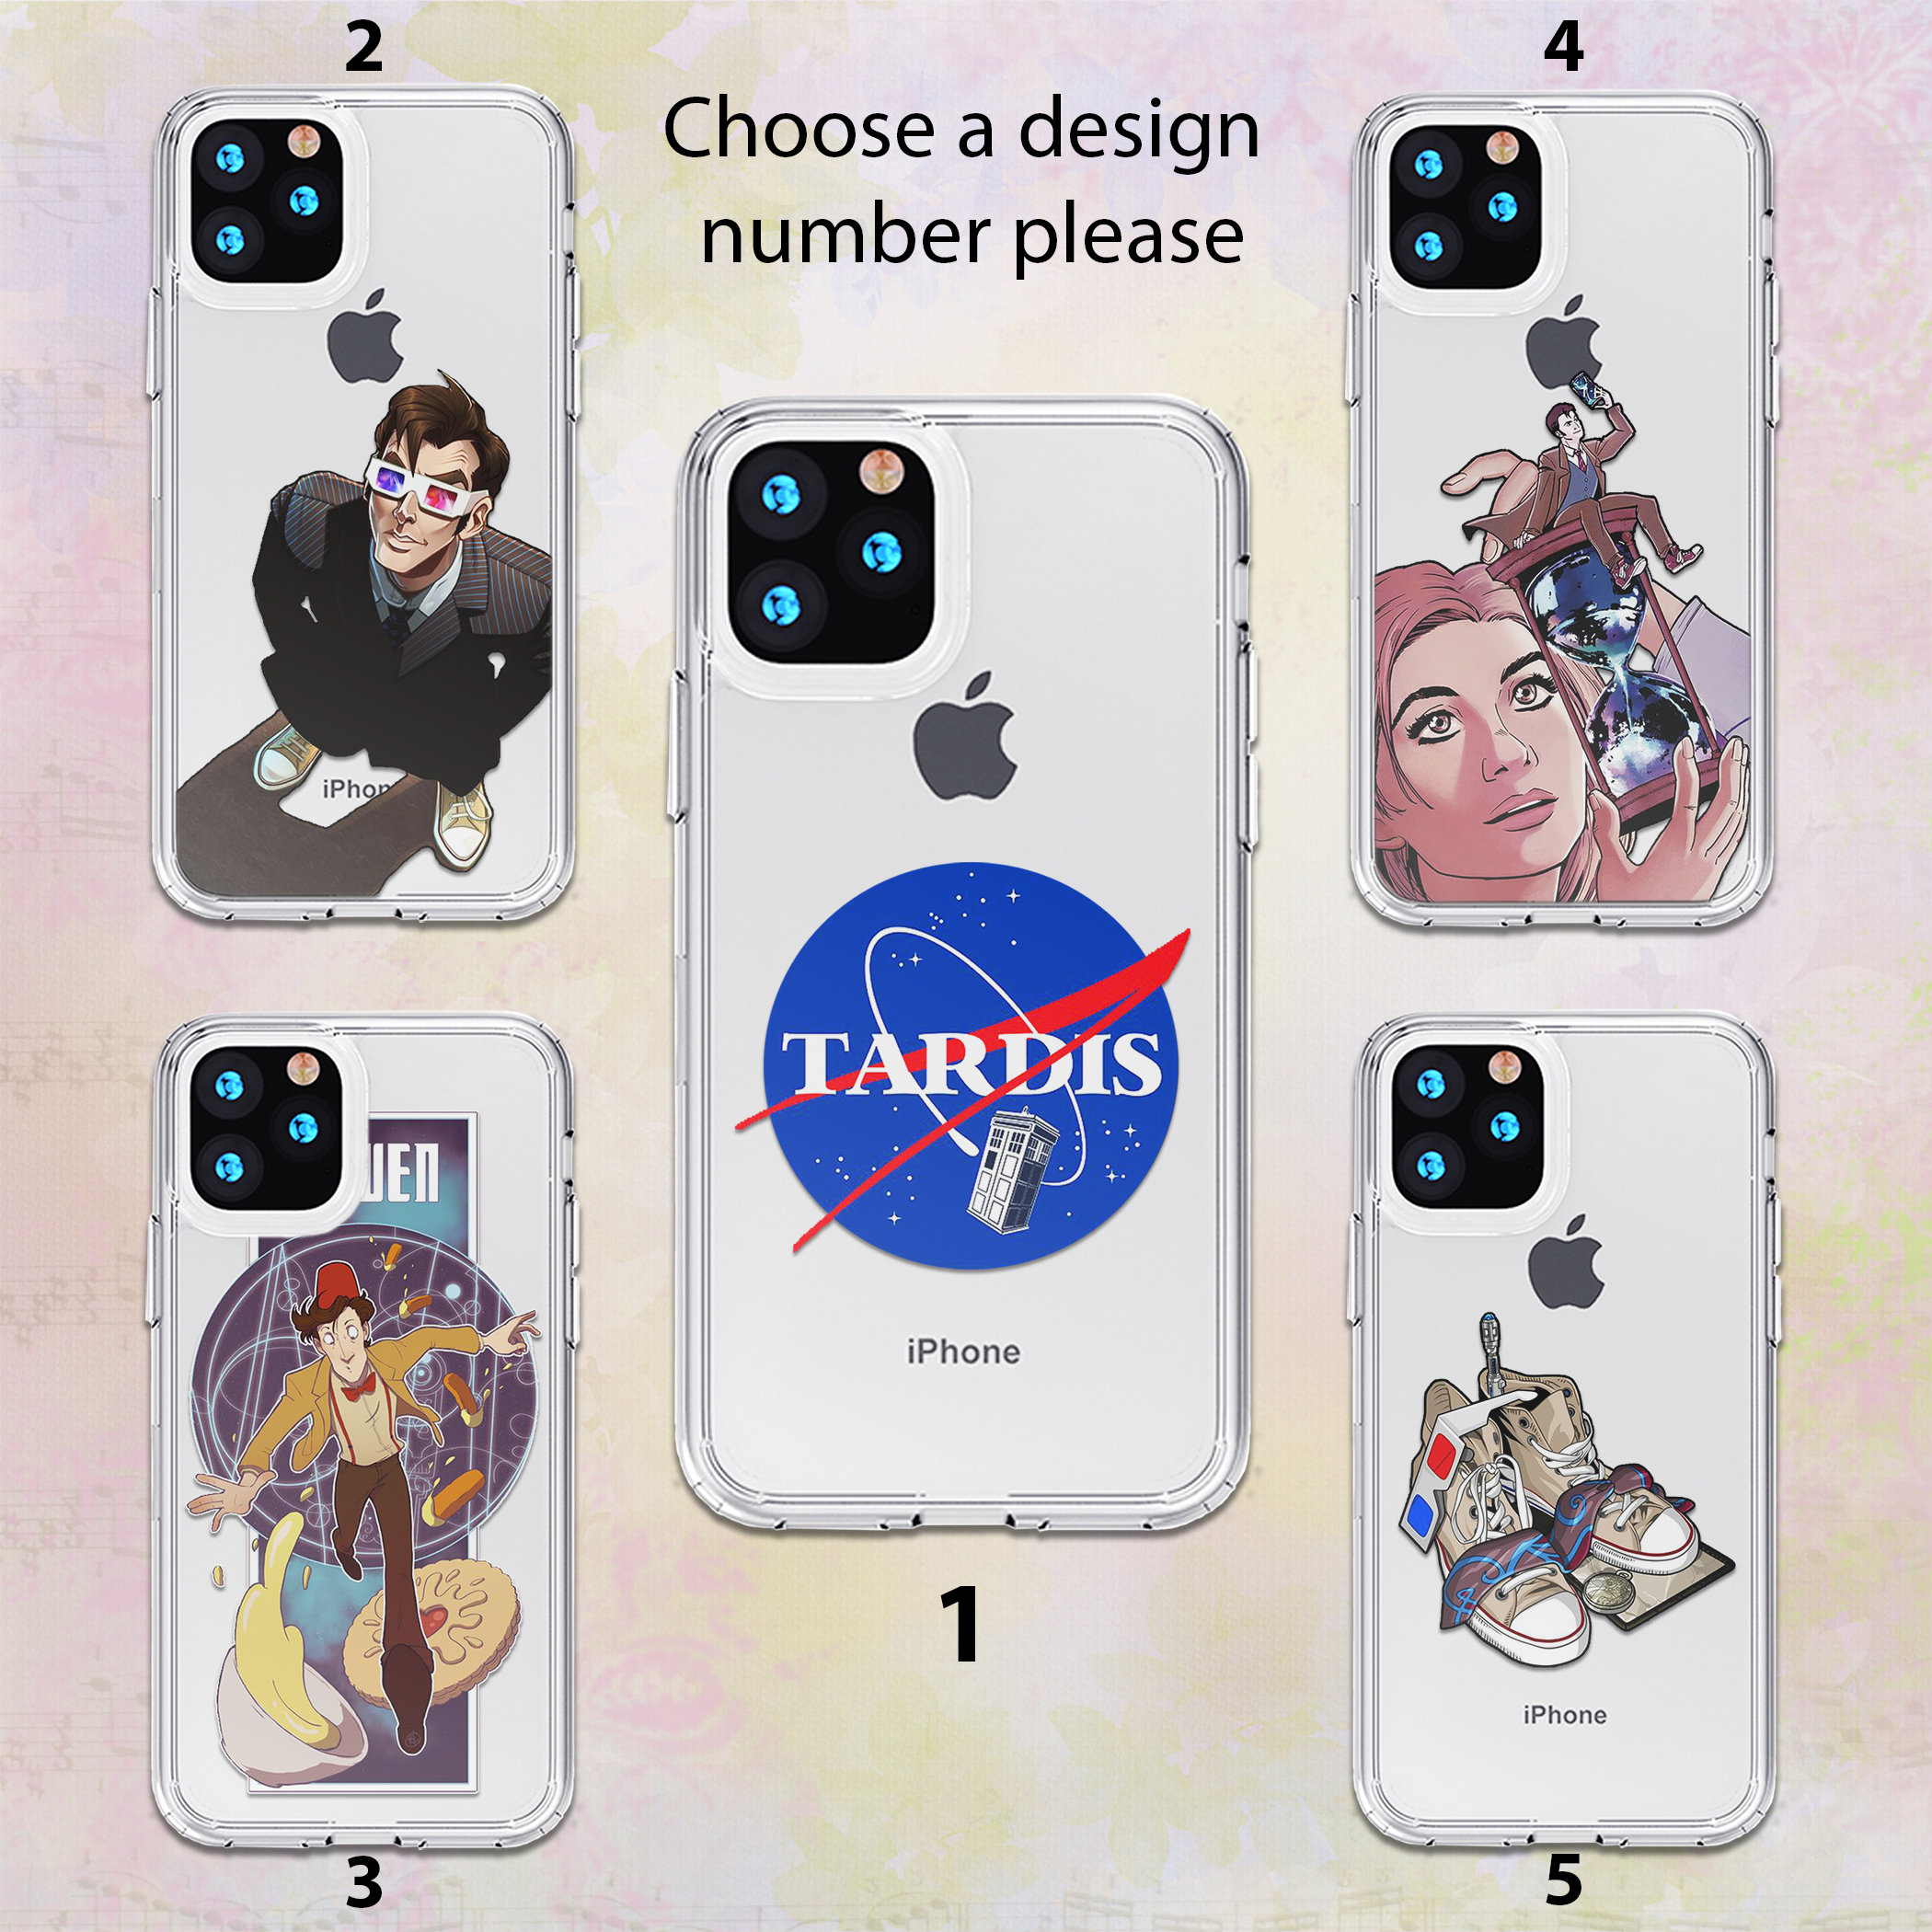 Inspired by Doctor Who Tardis iPhone X Case iPhone XR Case iPhone 7 plus 8 plus iPhone Xs Max Case iPhone Xs Case Police Box Dr Who Case M243 